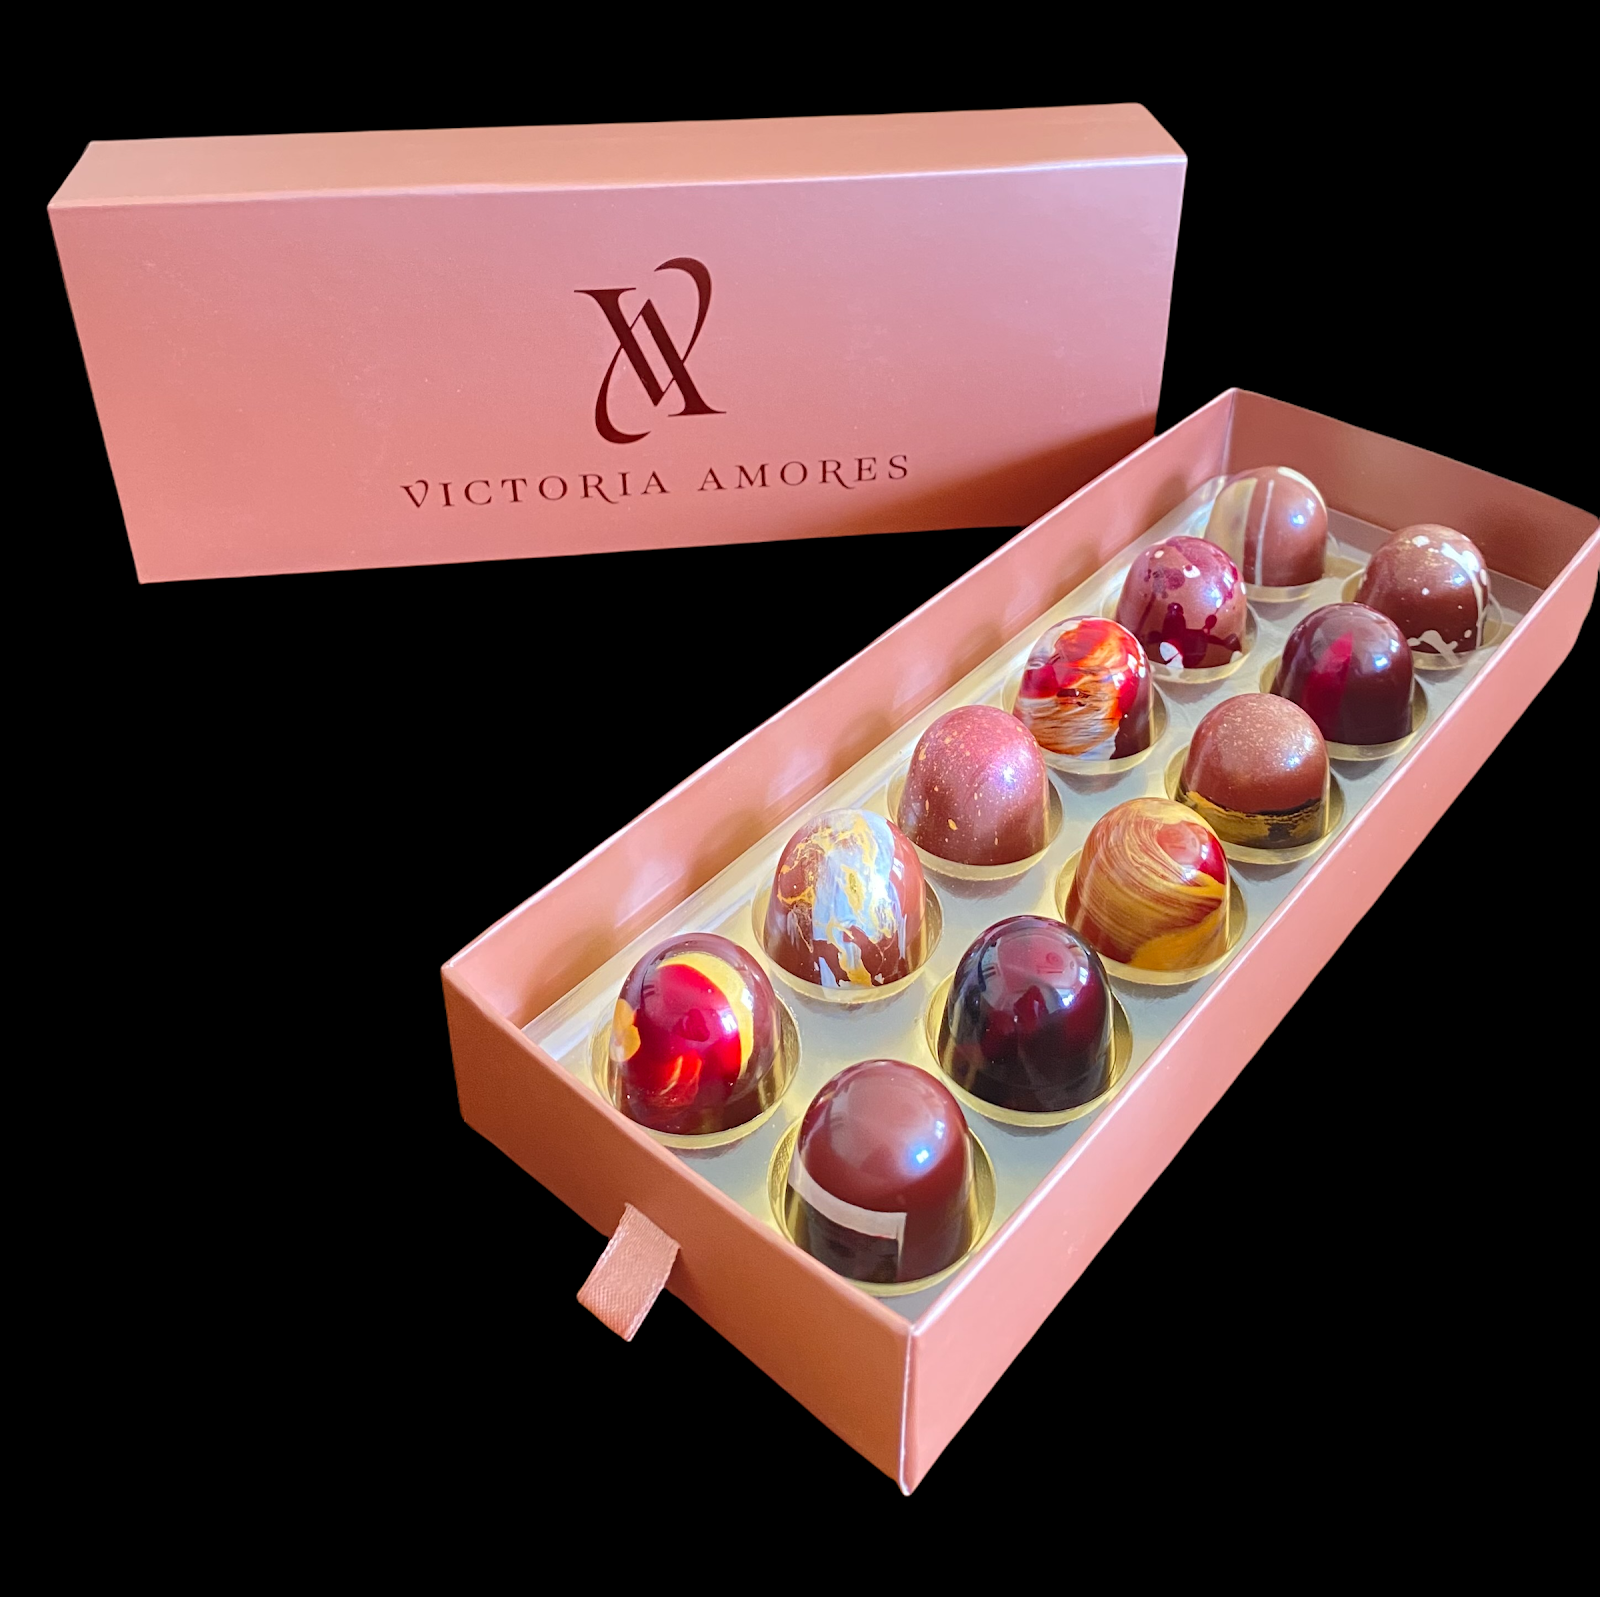 12 pc assorted chocolate bonbons 